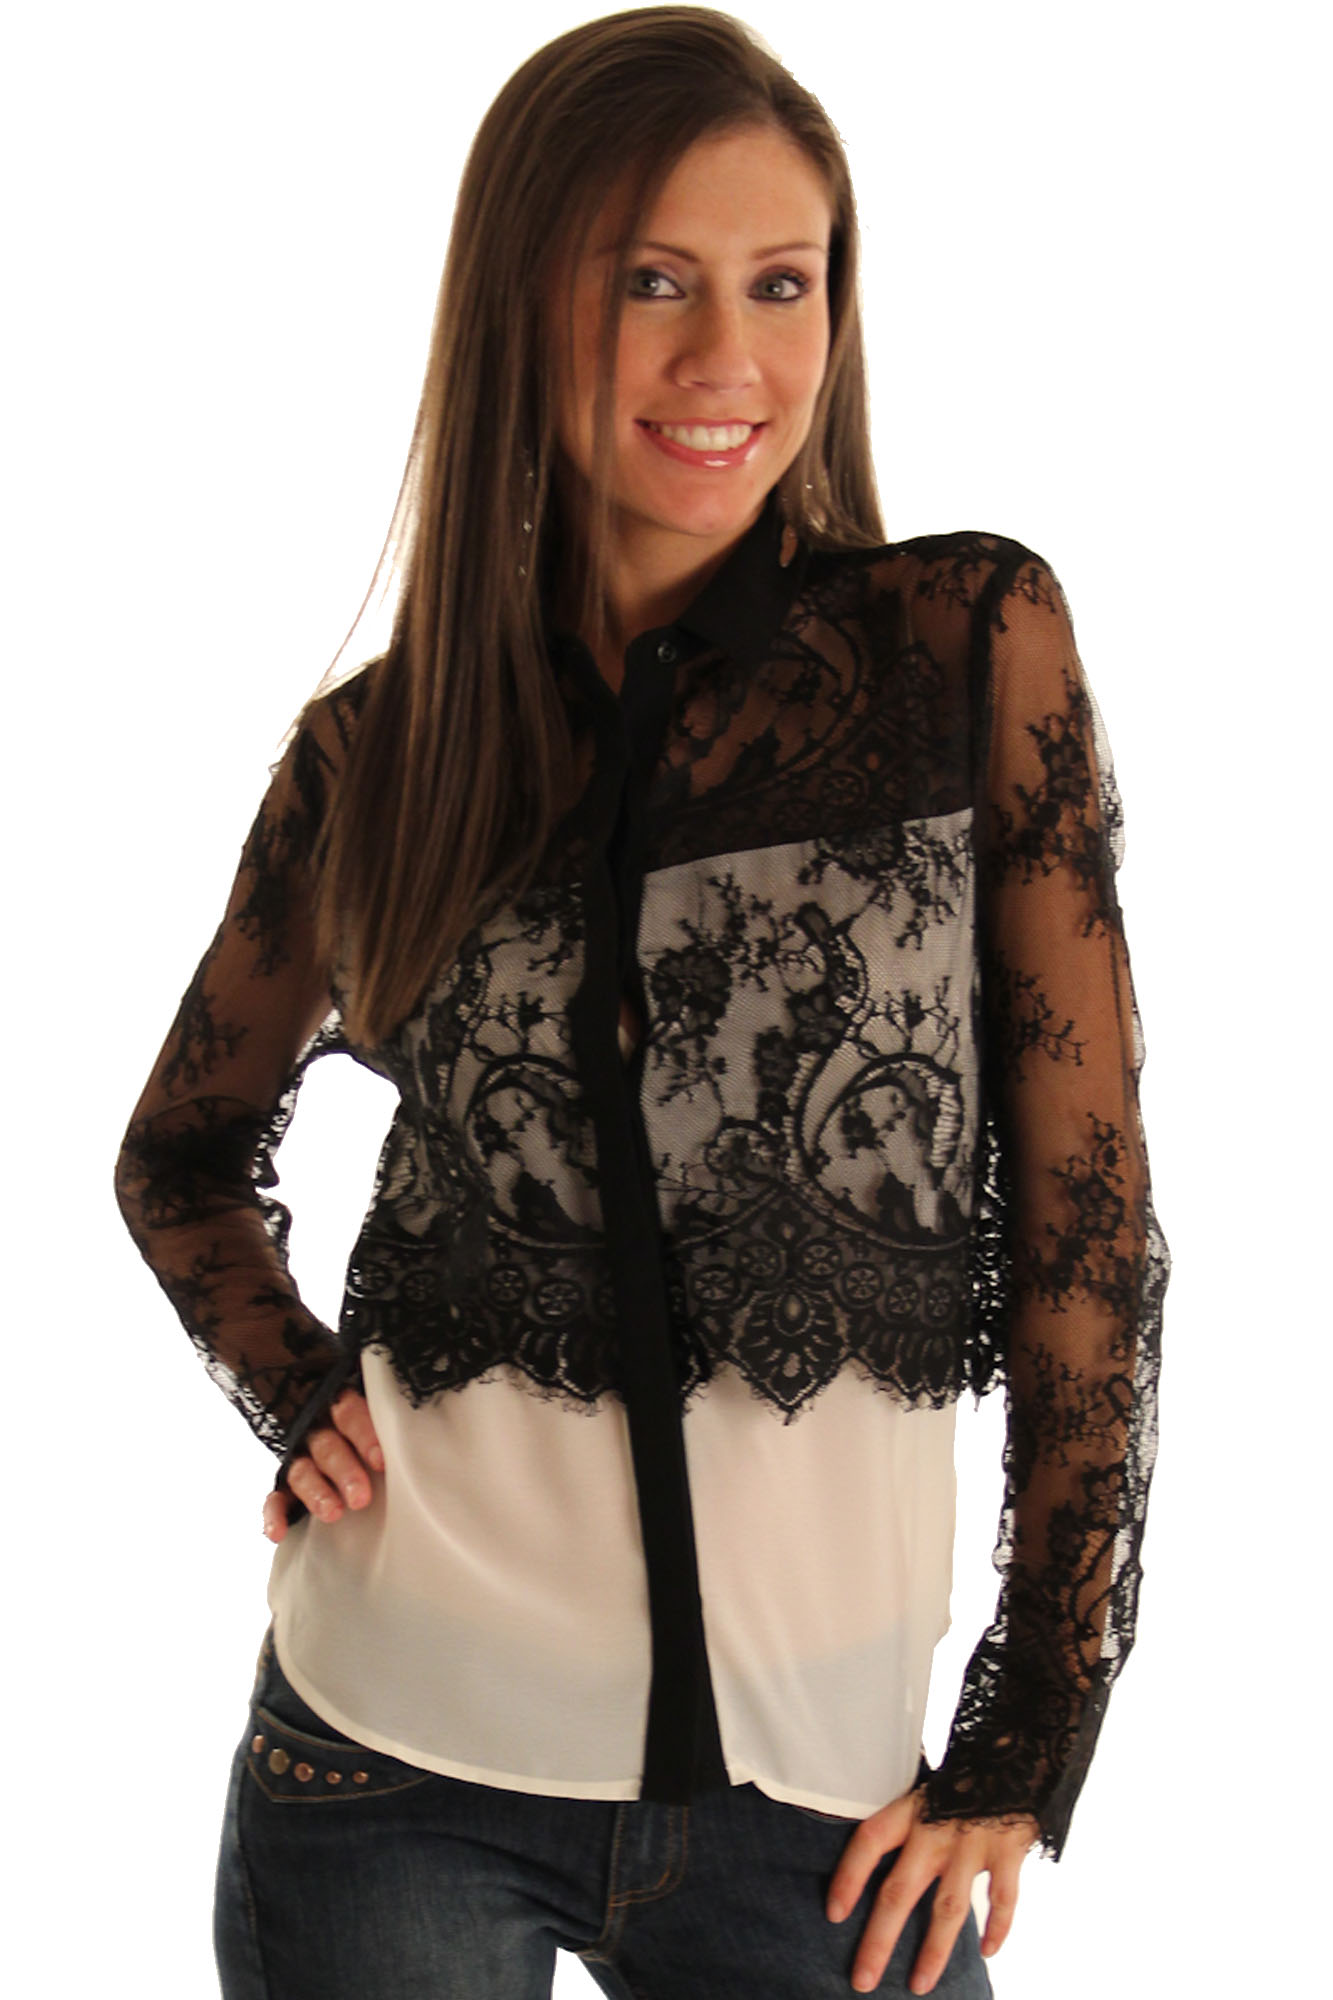 DHStyles.com DHStyles Women's Black Romantic Sheer Lace Long Sleeve Top - Large